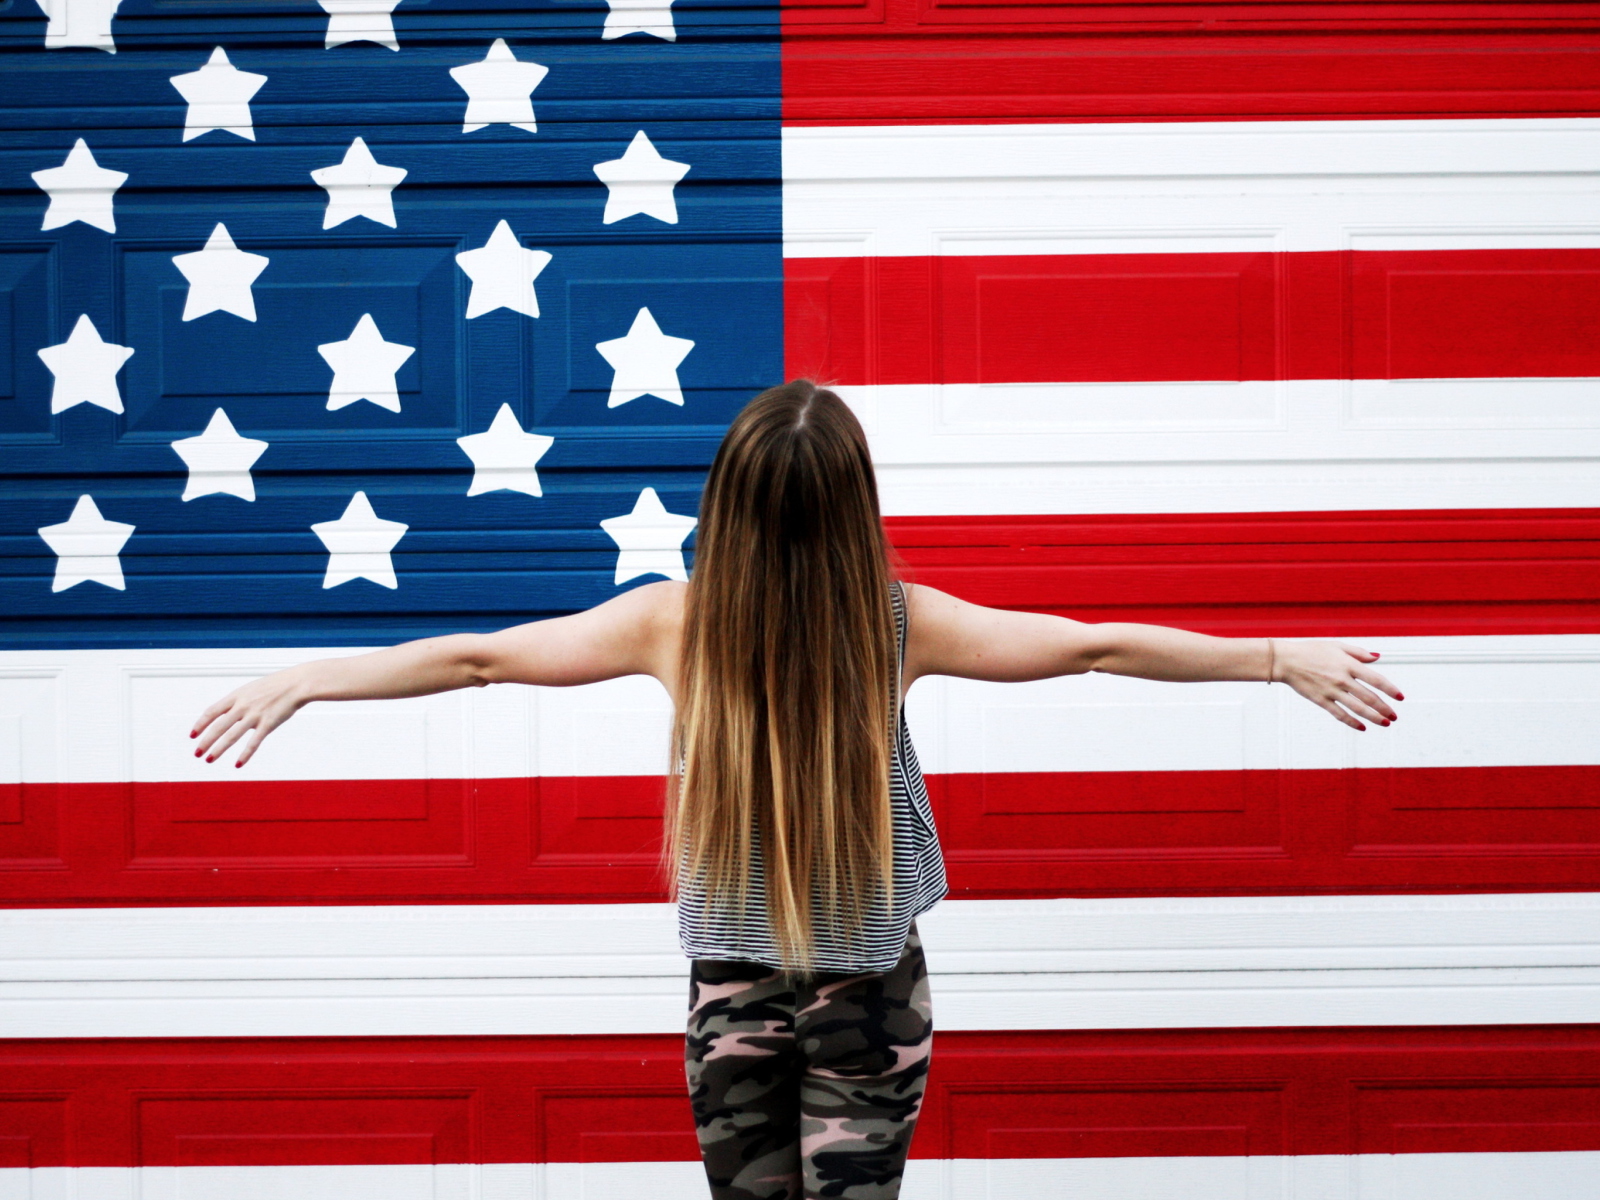 Das American Girl In Front Of USA Flag Wallpaper 1600x1200